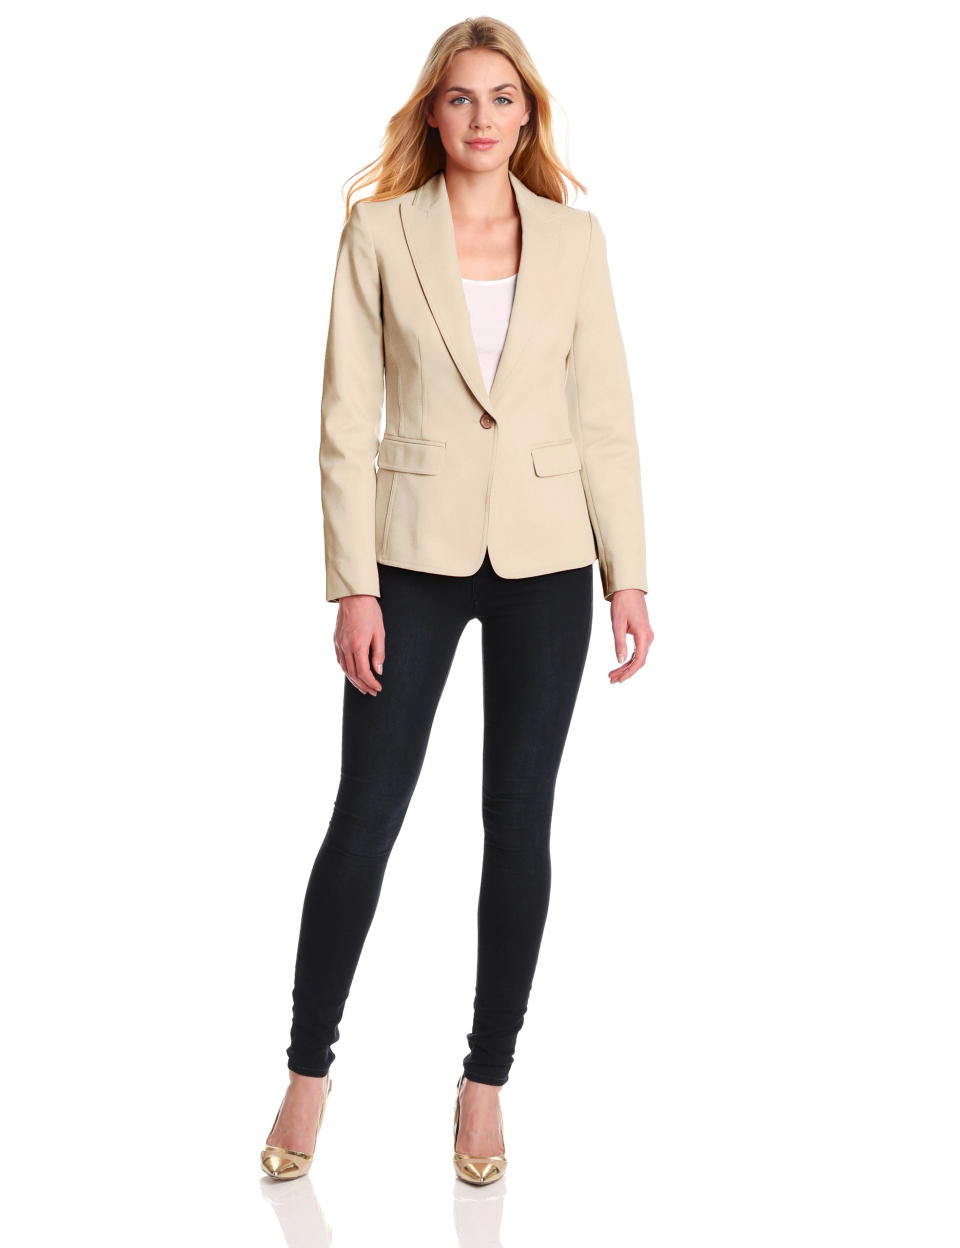 This publicity photo provided by amazon.com/fashion shows a model wearing a women's one button blazer from Anne Klein. Many closet-to-classroom items are basic pieces, including a pencil skirt, fit-and-flare dress, collared shirts, blazers, jeans and sweaters, so they can make the transition between seasons and school years. They can all be dressed up or down, and adapted to look “new” with the right belt, shoe or jewelry. (AP Photo/amazon.com/fashion)